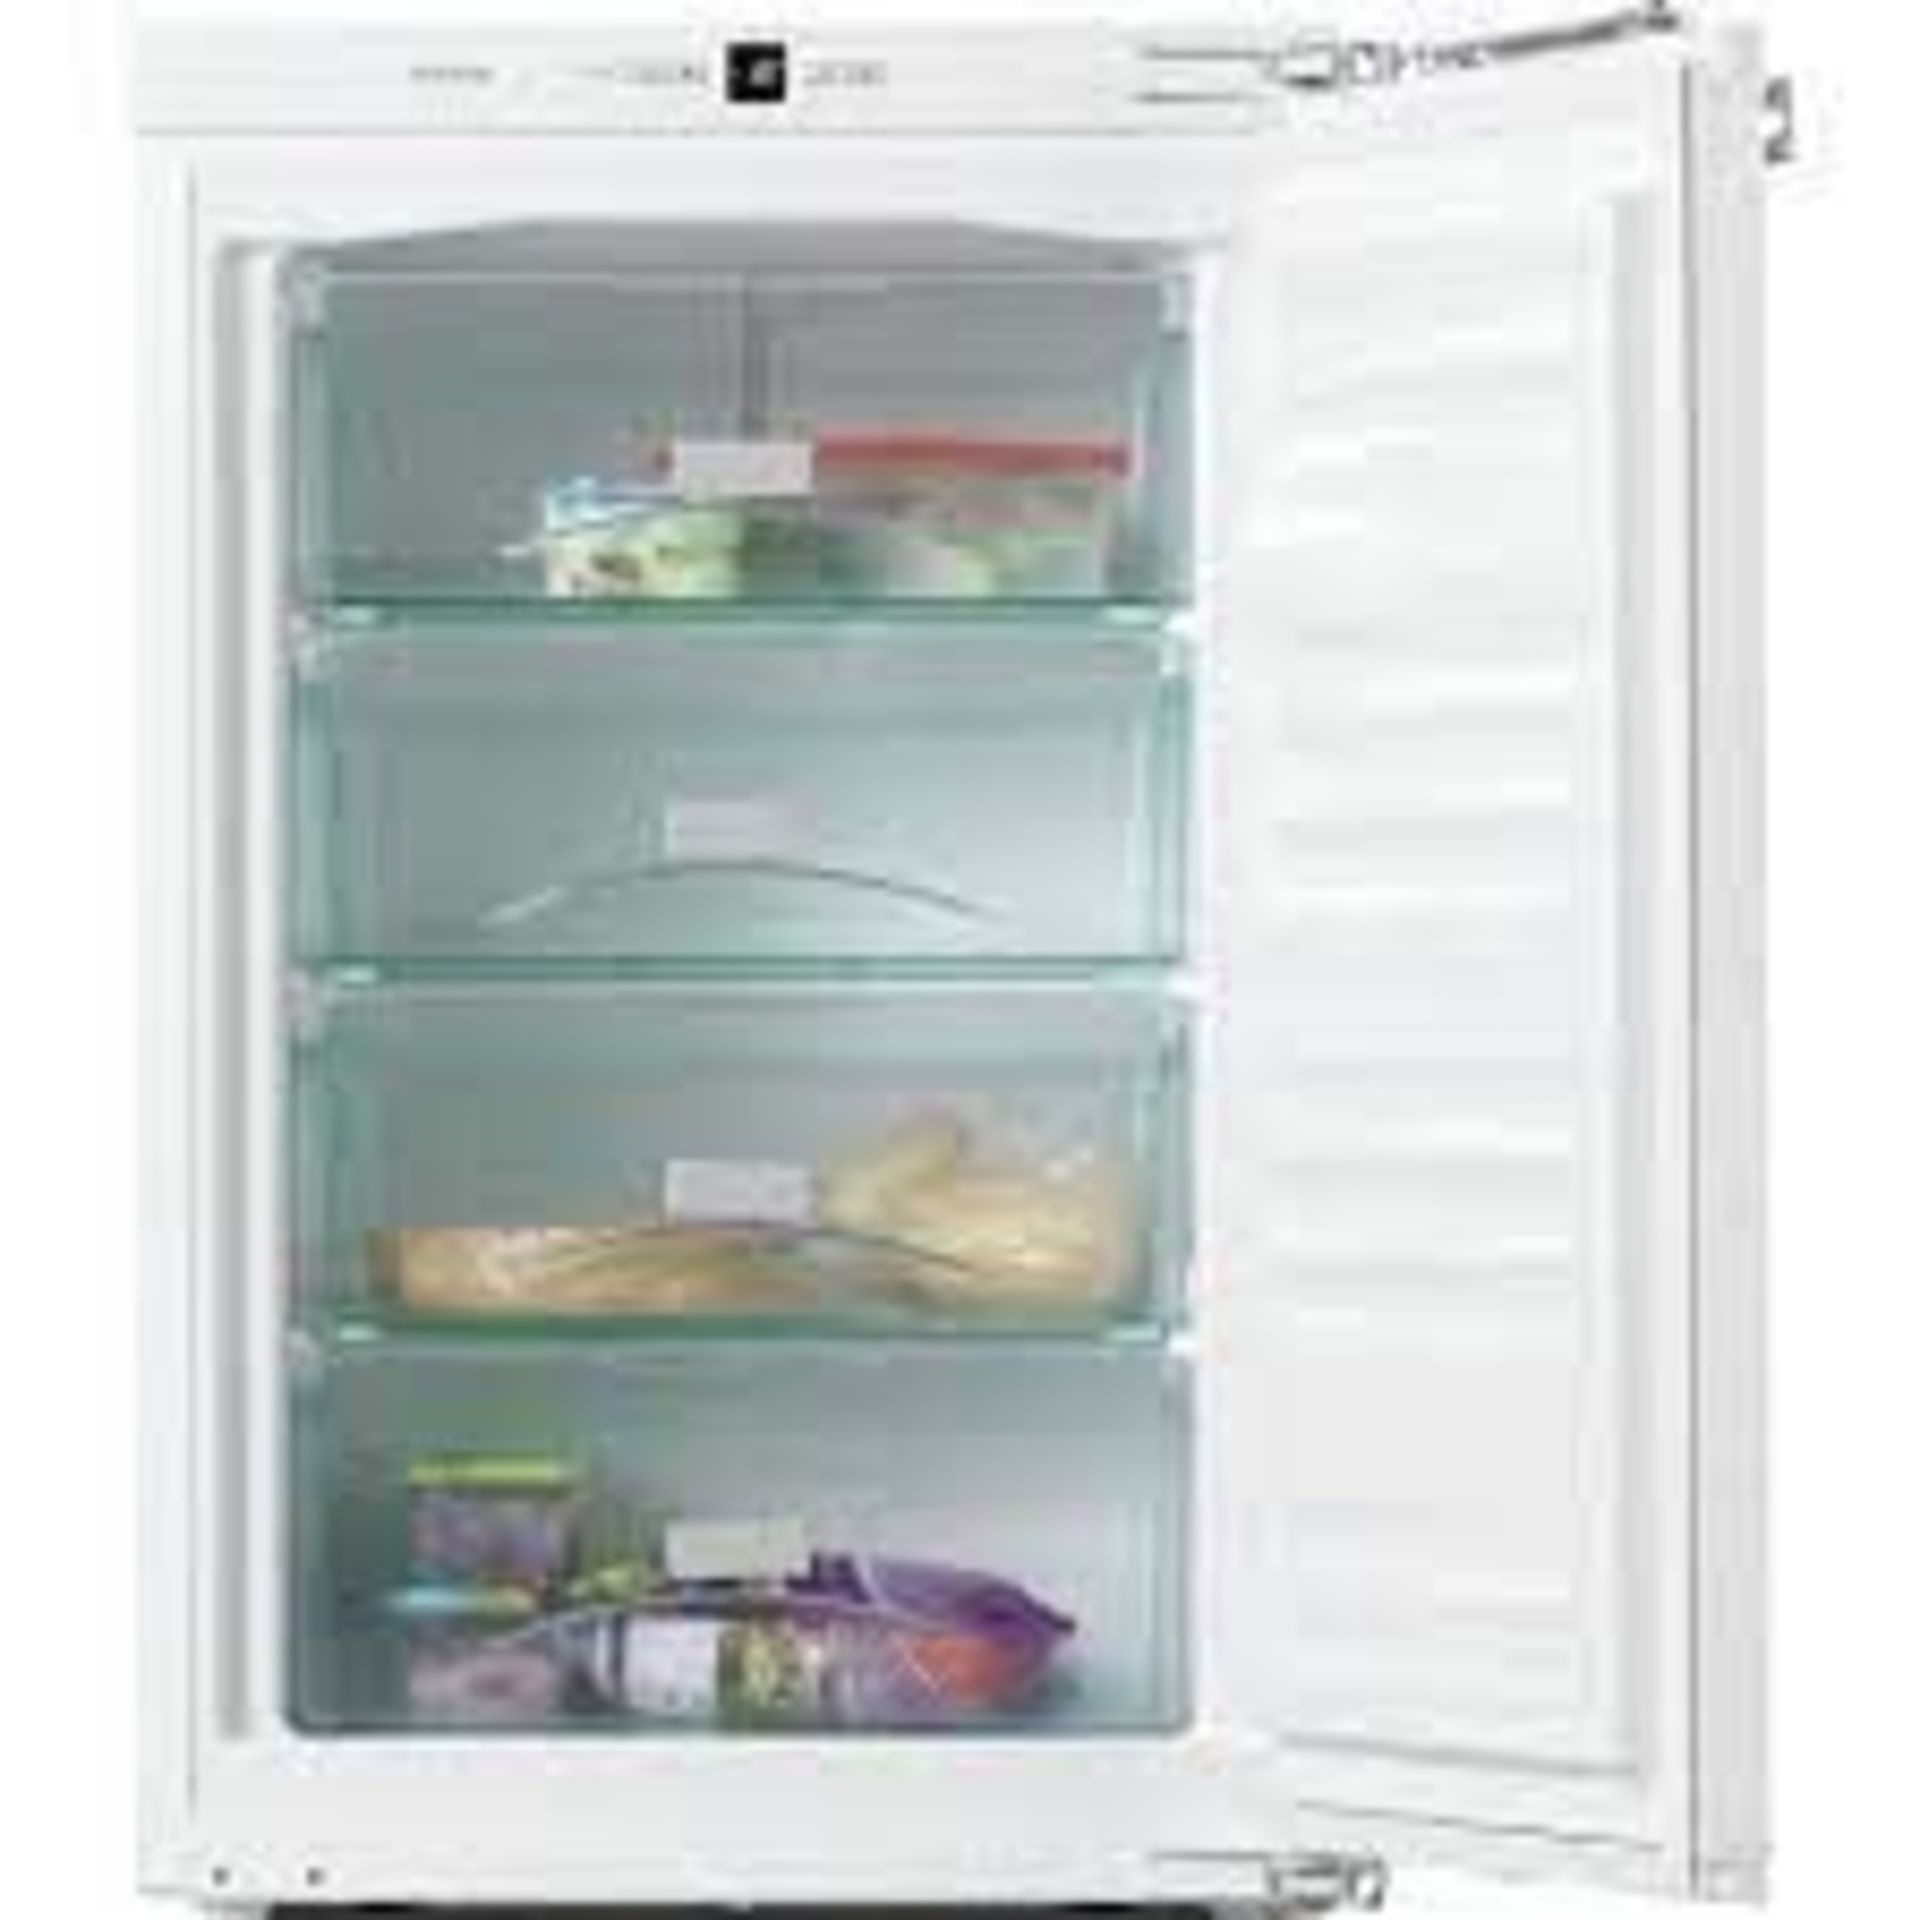 Miele F 32202 i Built in Freezer. - H/S. RRP £899.99. Built-in freezer with VarioRoom and four - Bild 2 aus 3